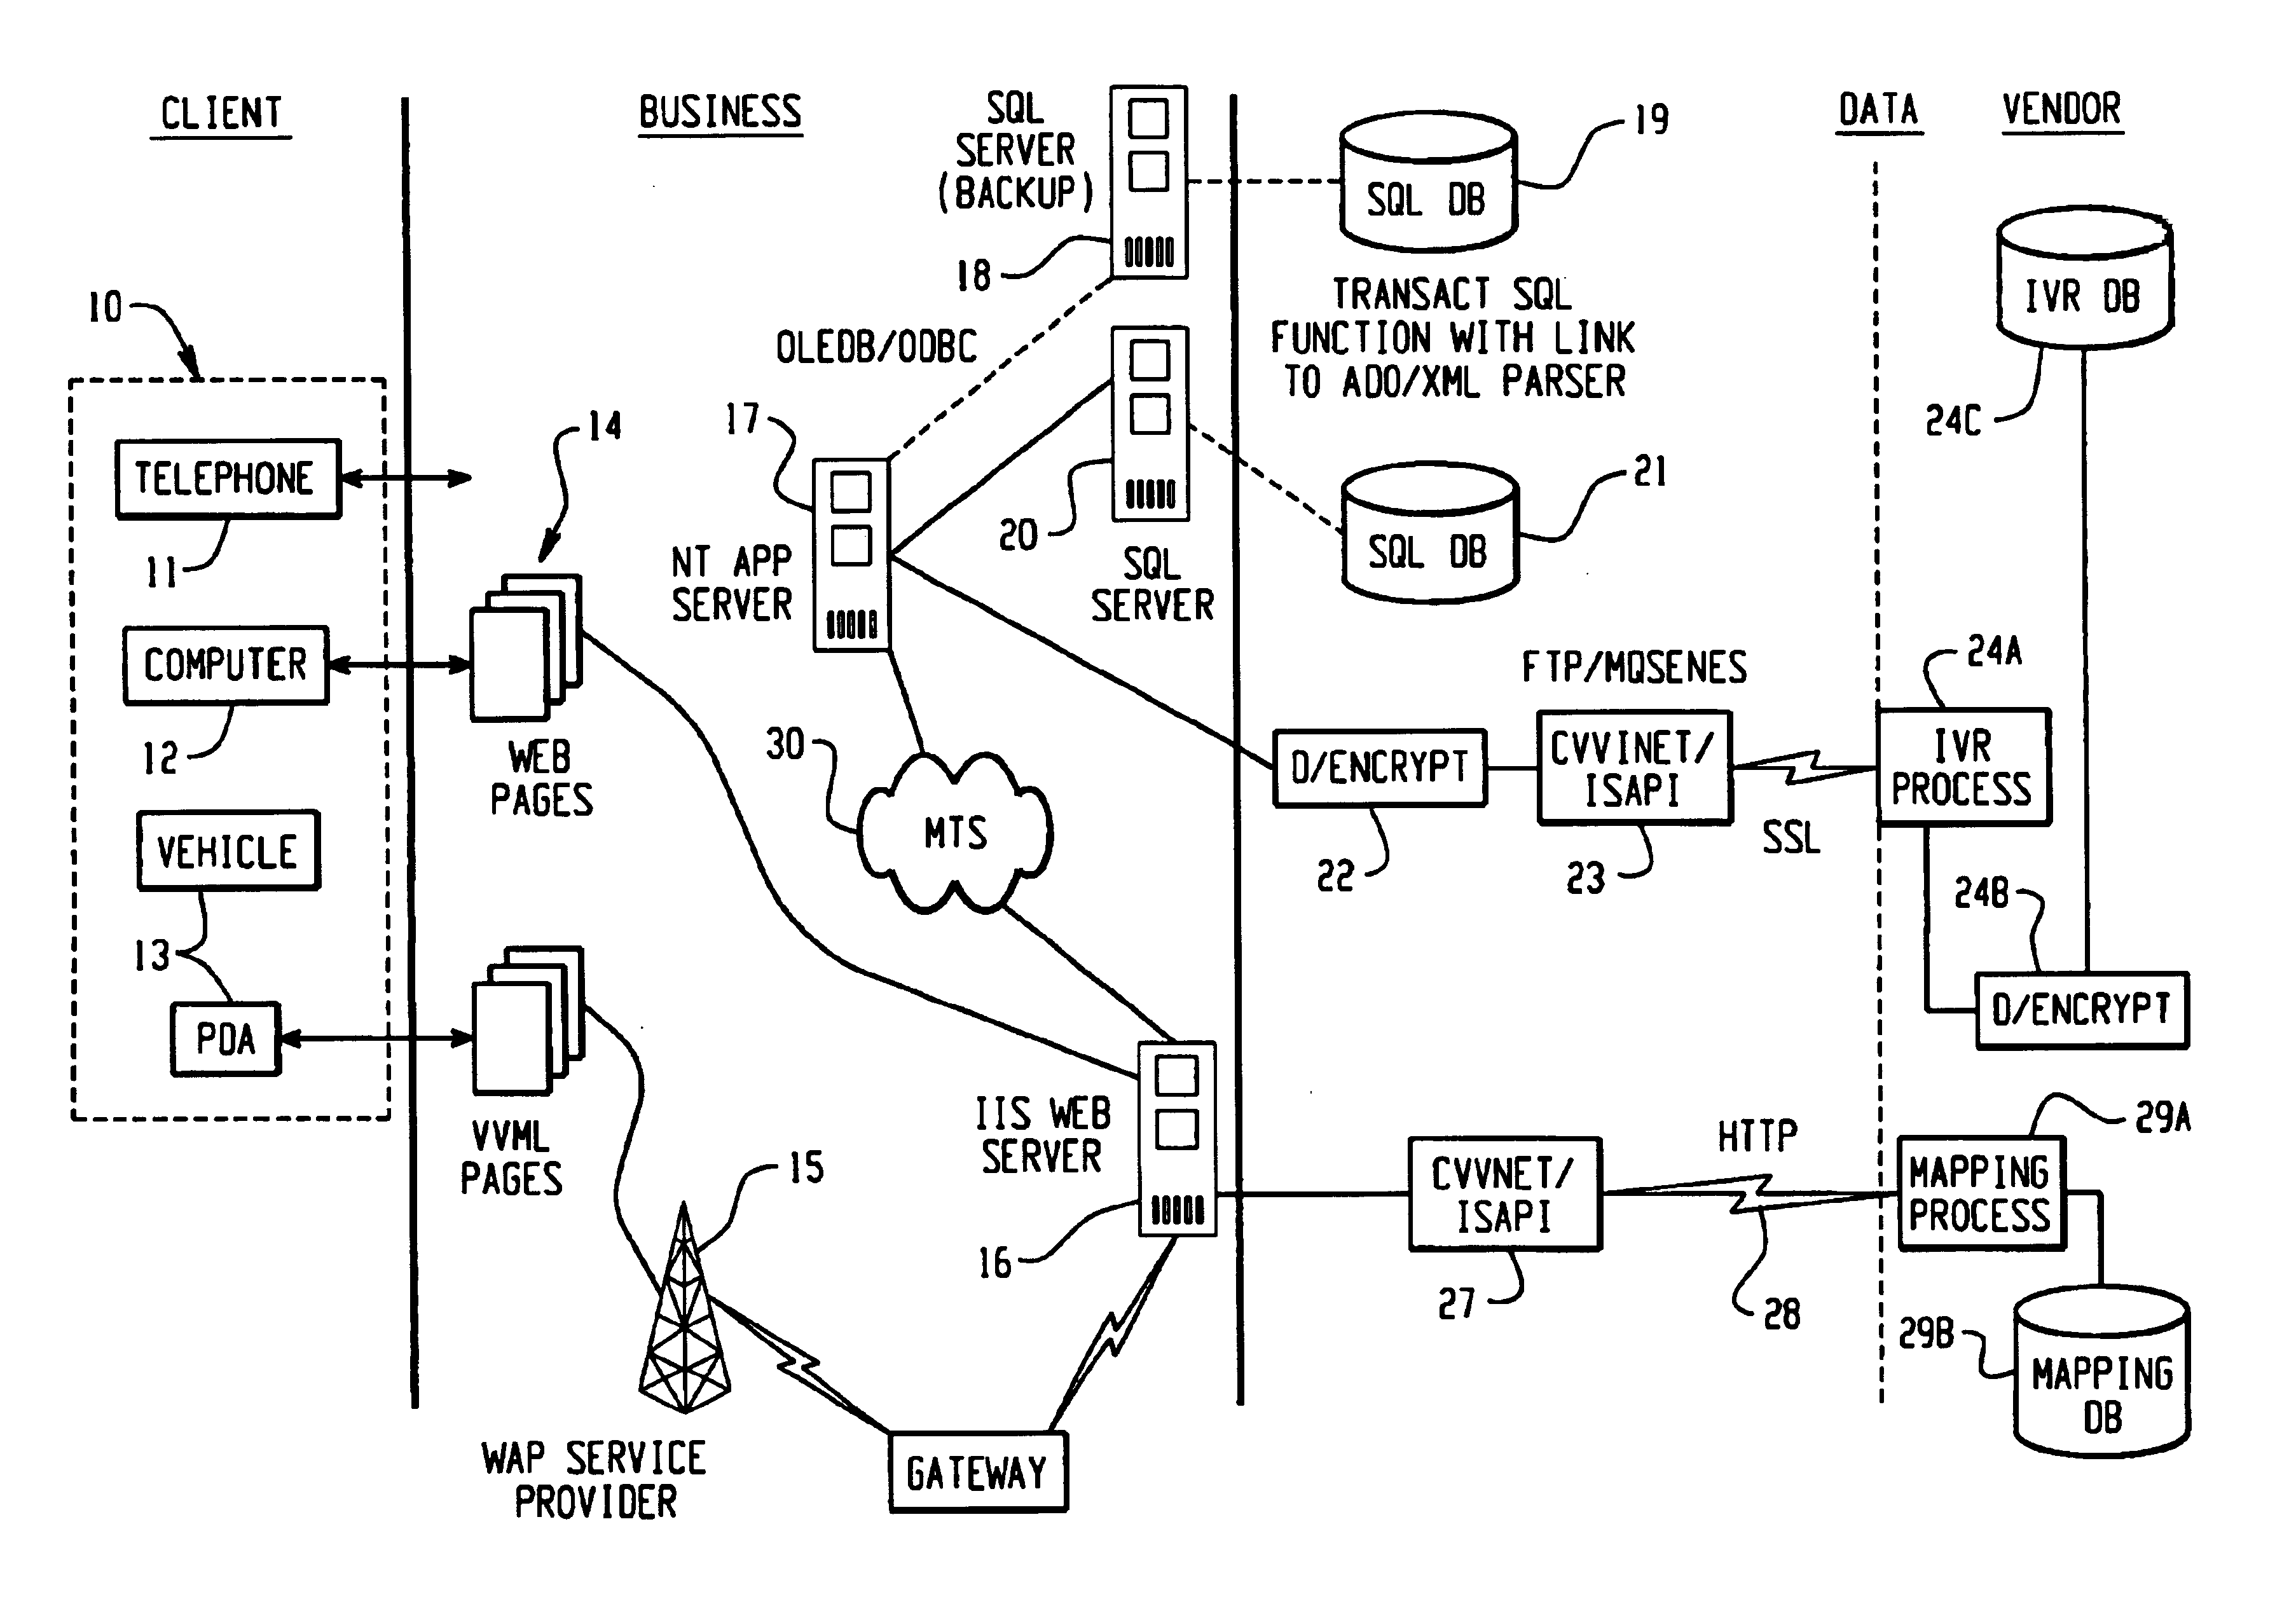 Systems, methods and computer program products for facilitating the sale of commodity-like goods/services